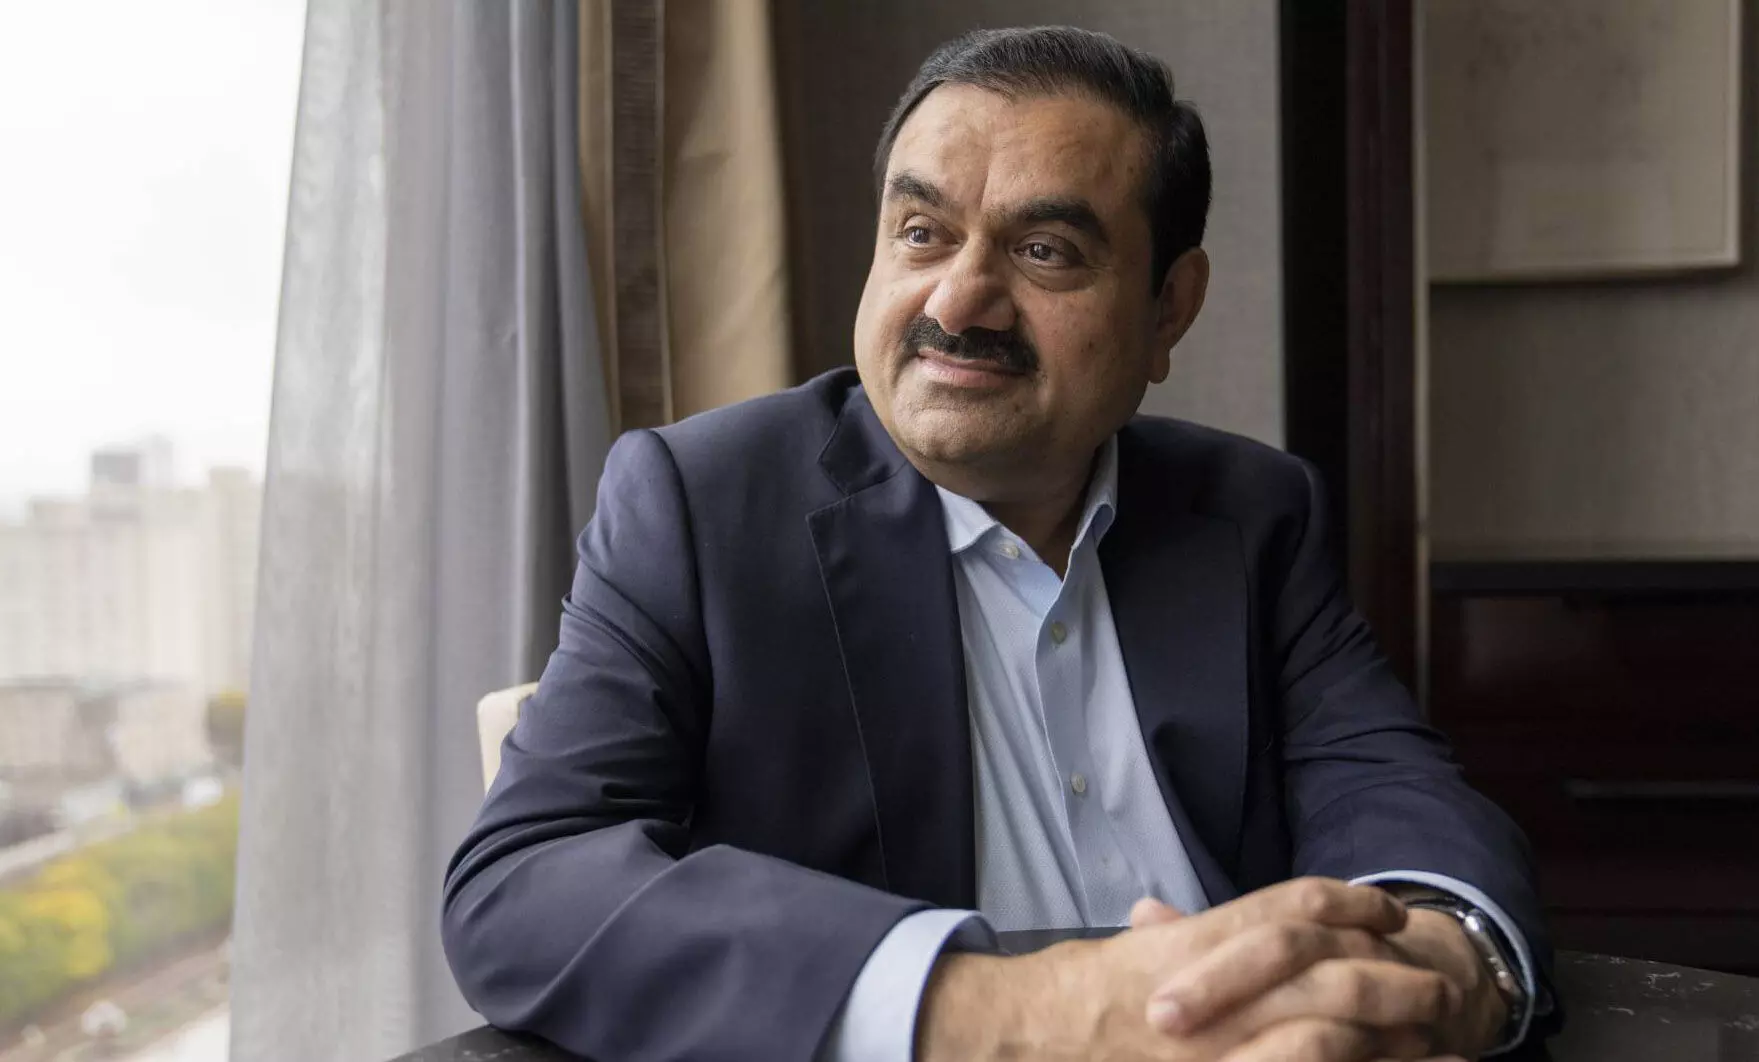 Adani Group to focus more on green energy after surging profits: report